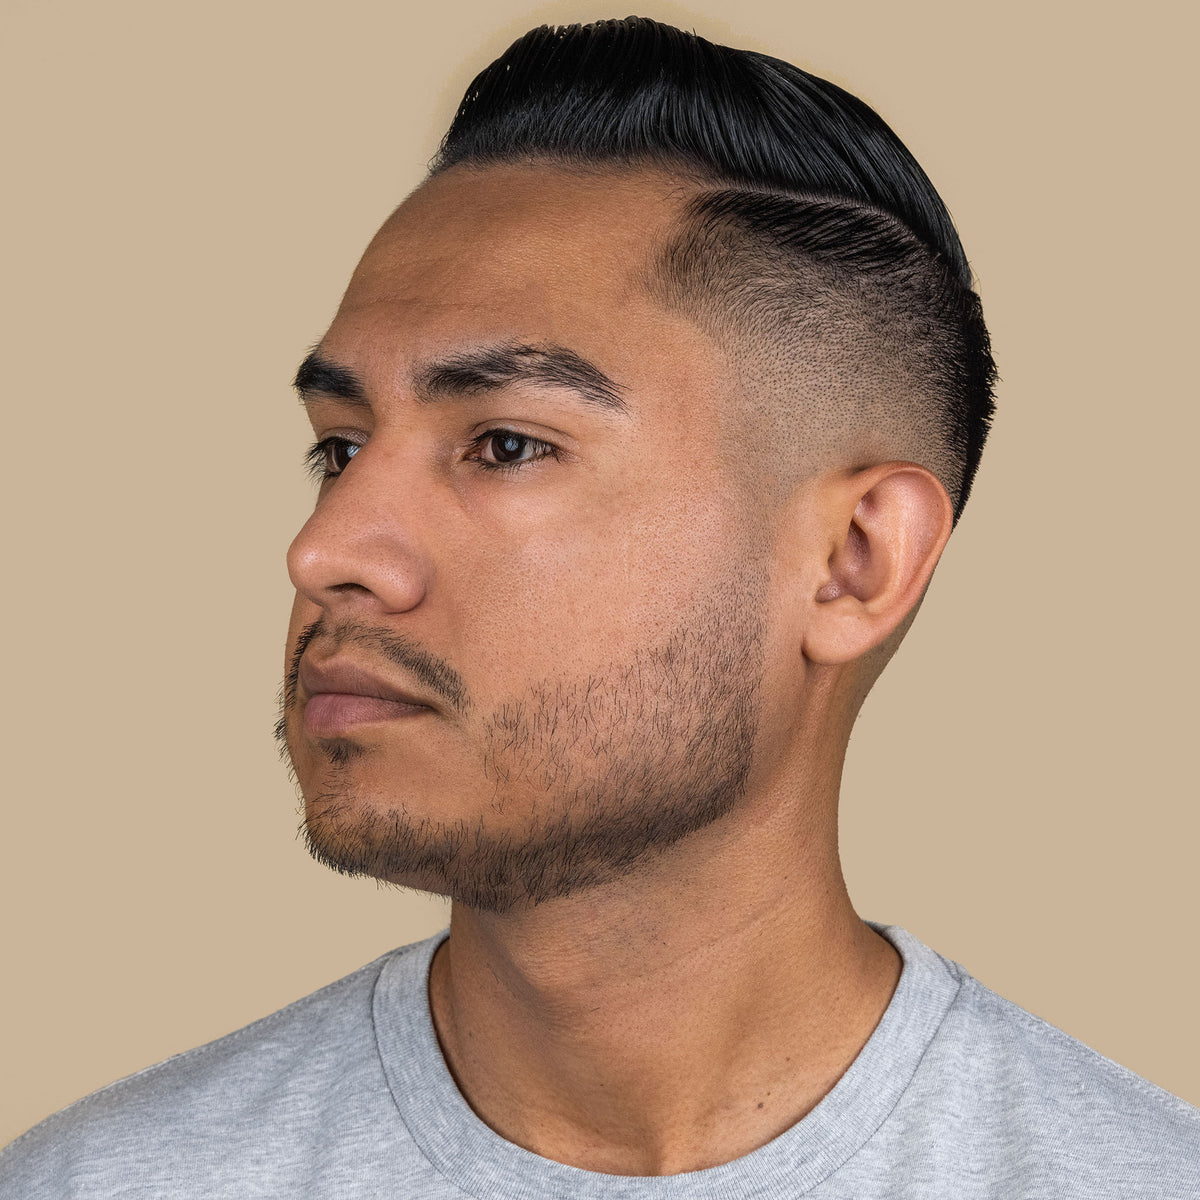 Man with hair styled used Suavecito water-based pomade